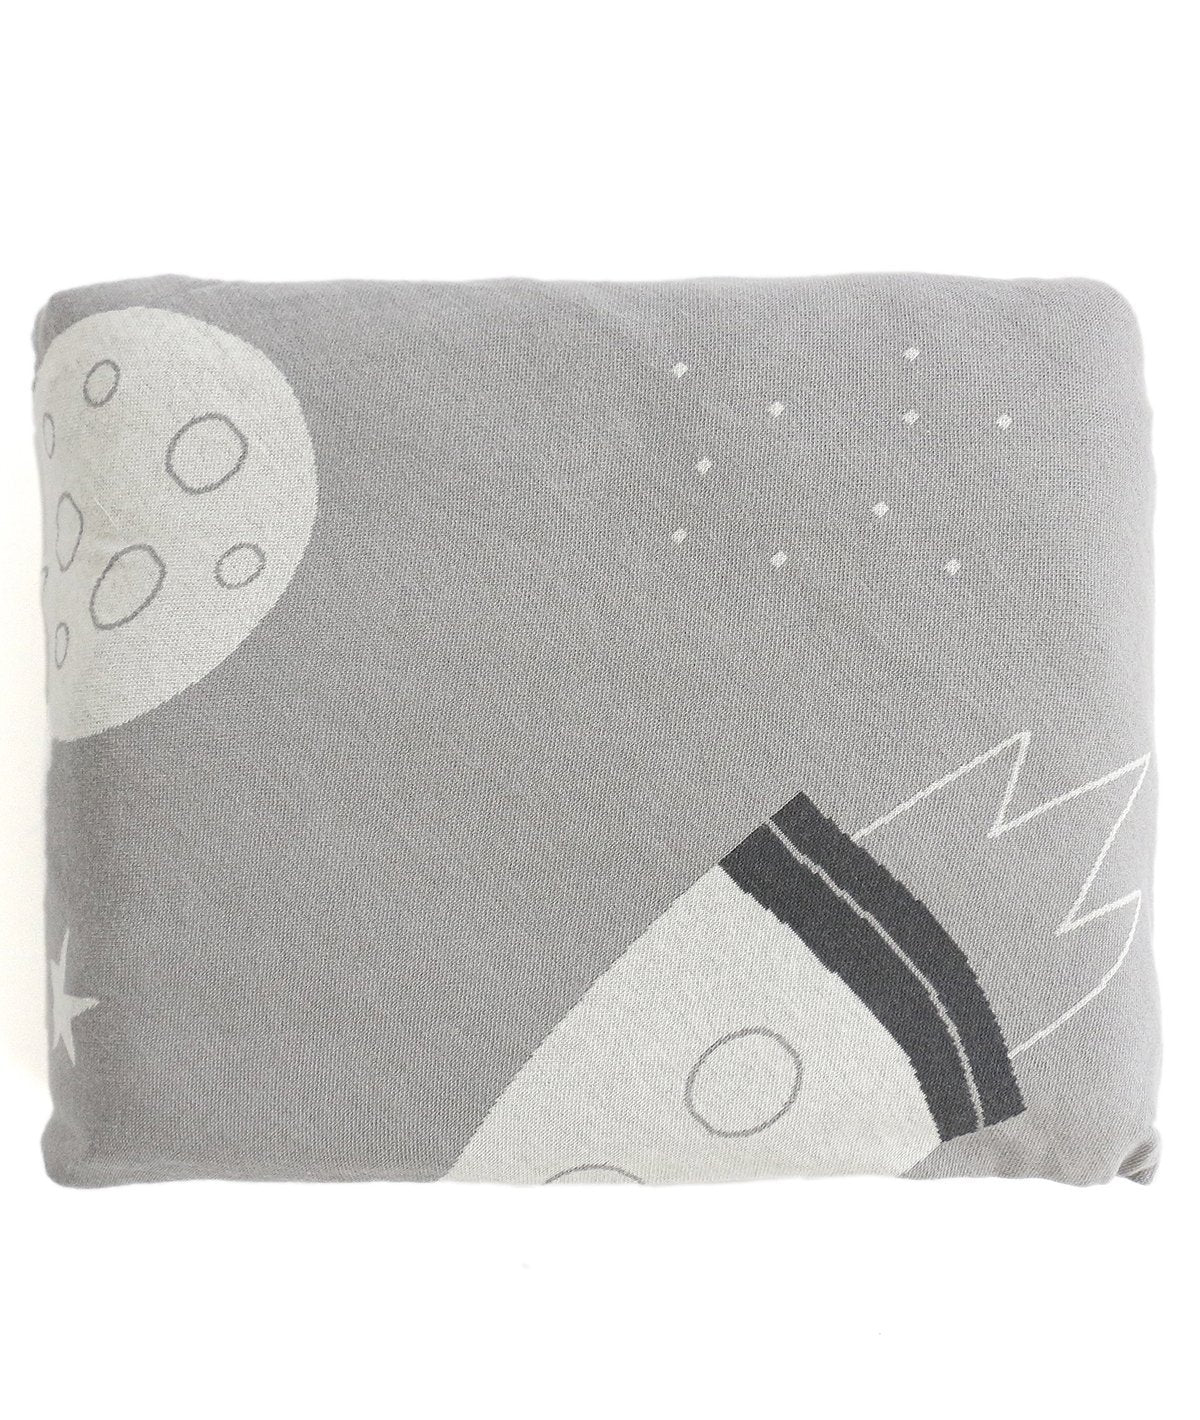 Rocket League Grey Cotton Knitted King Size Double Bed Fitted Sheet with 2 Pillow Covers Set